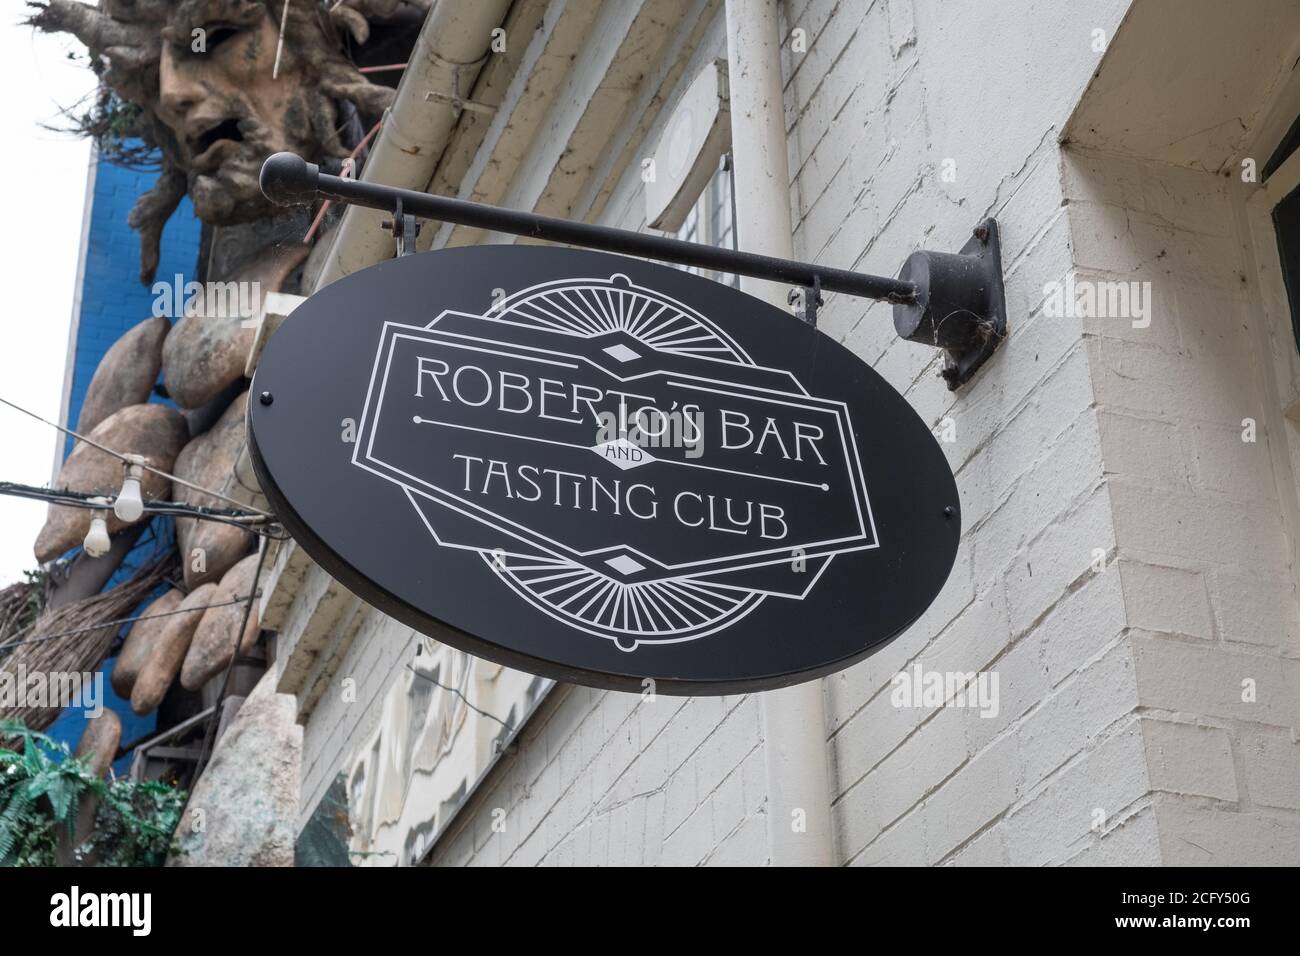 Roberto's Bar Tasting Club craft beer and bottle shop in the Custard Factory in the creative quarter of Digbeth, Birmingham, UK Stock Photo